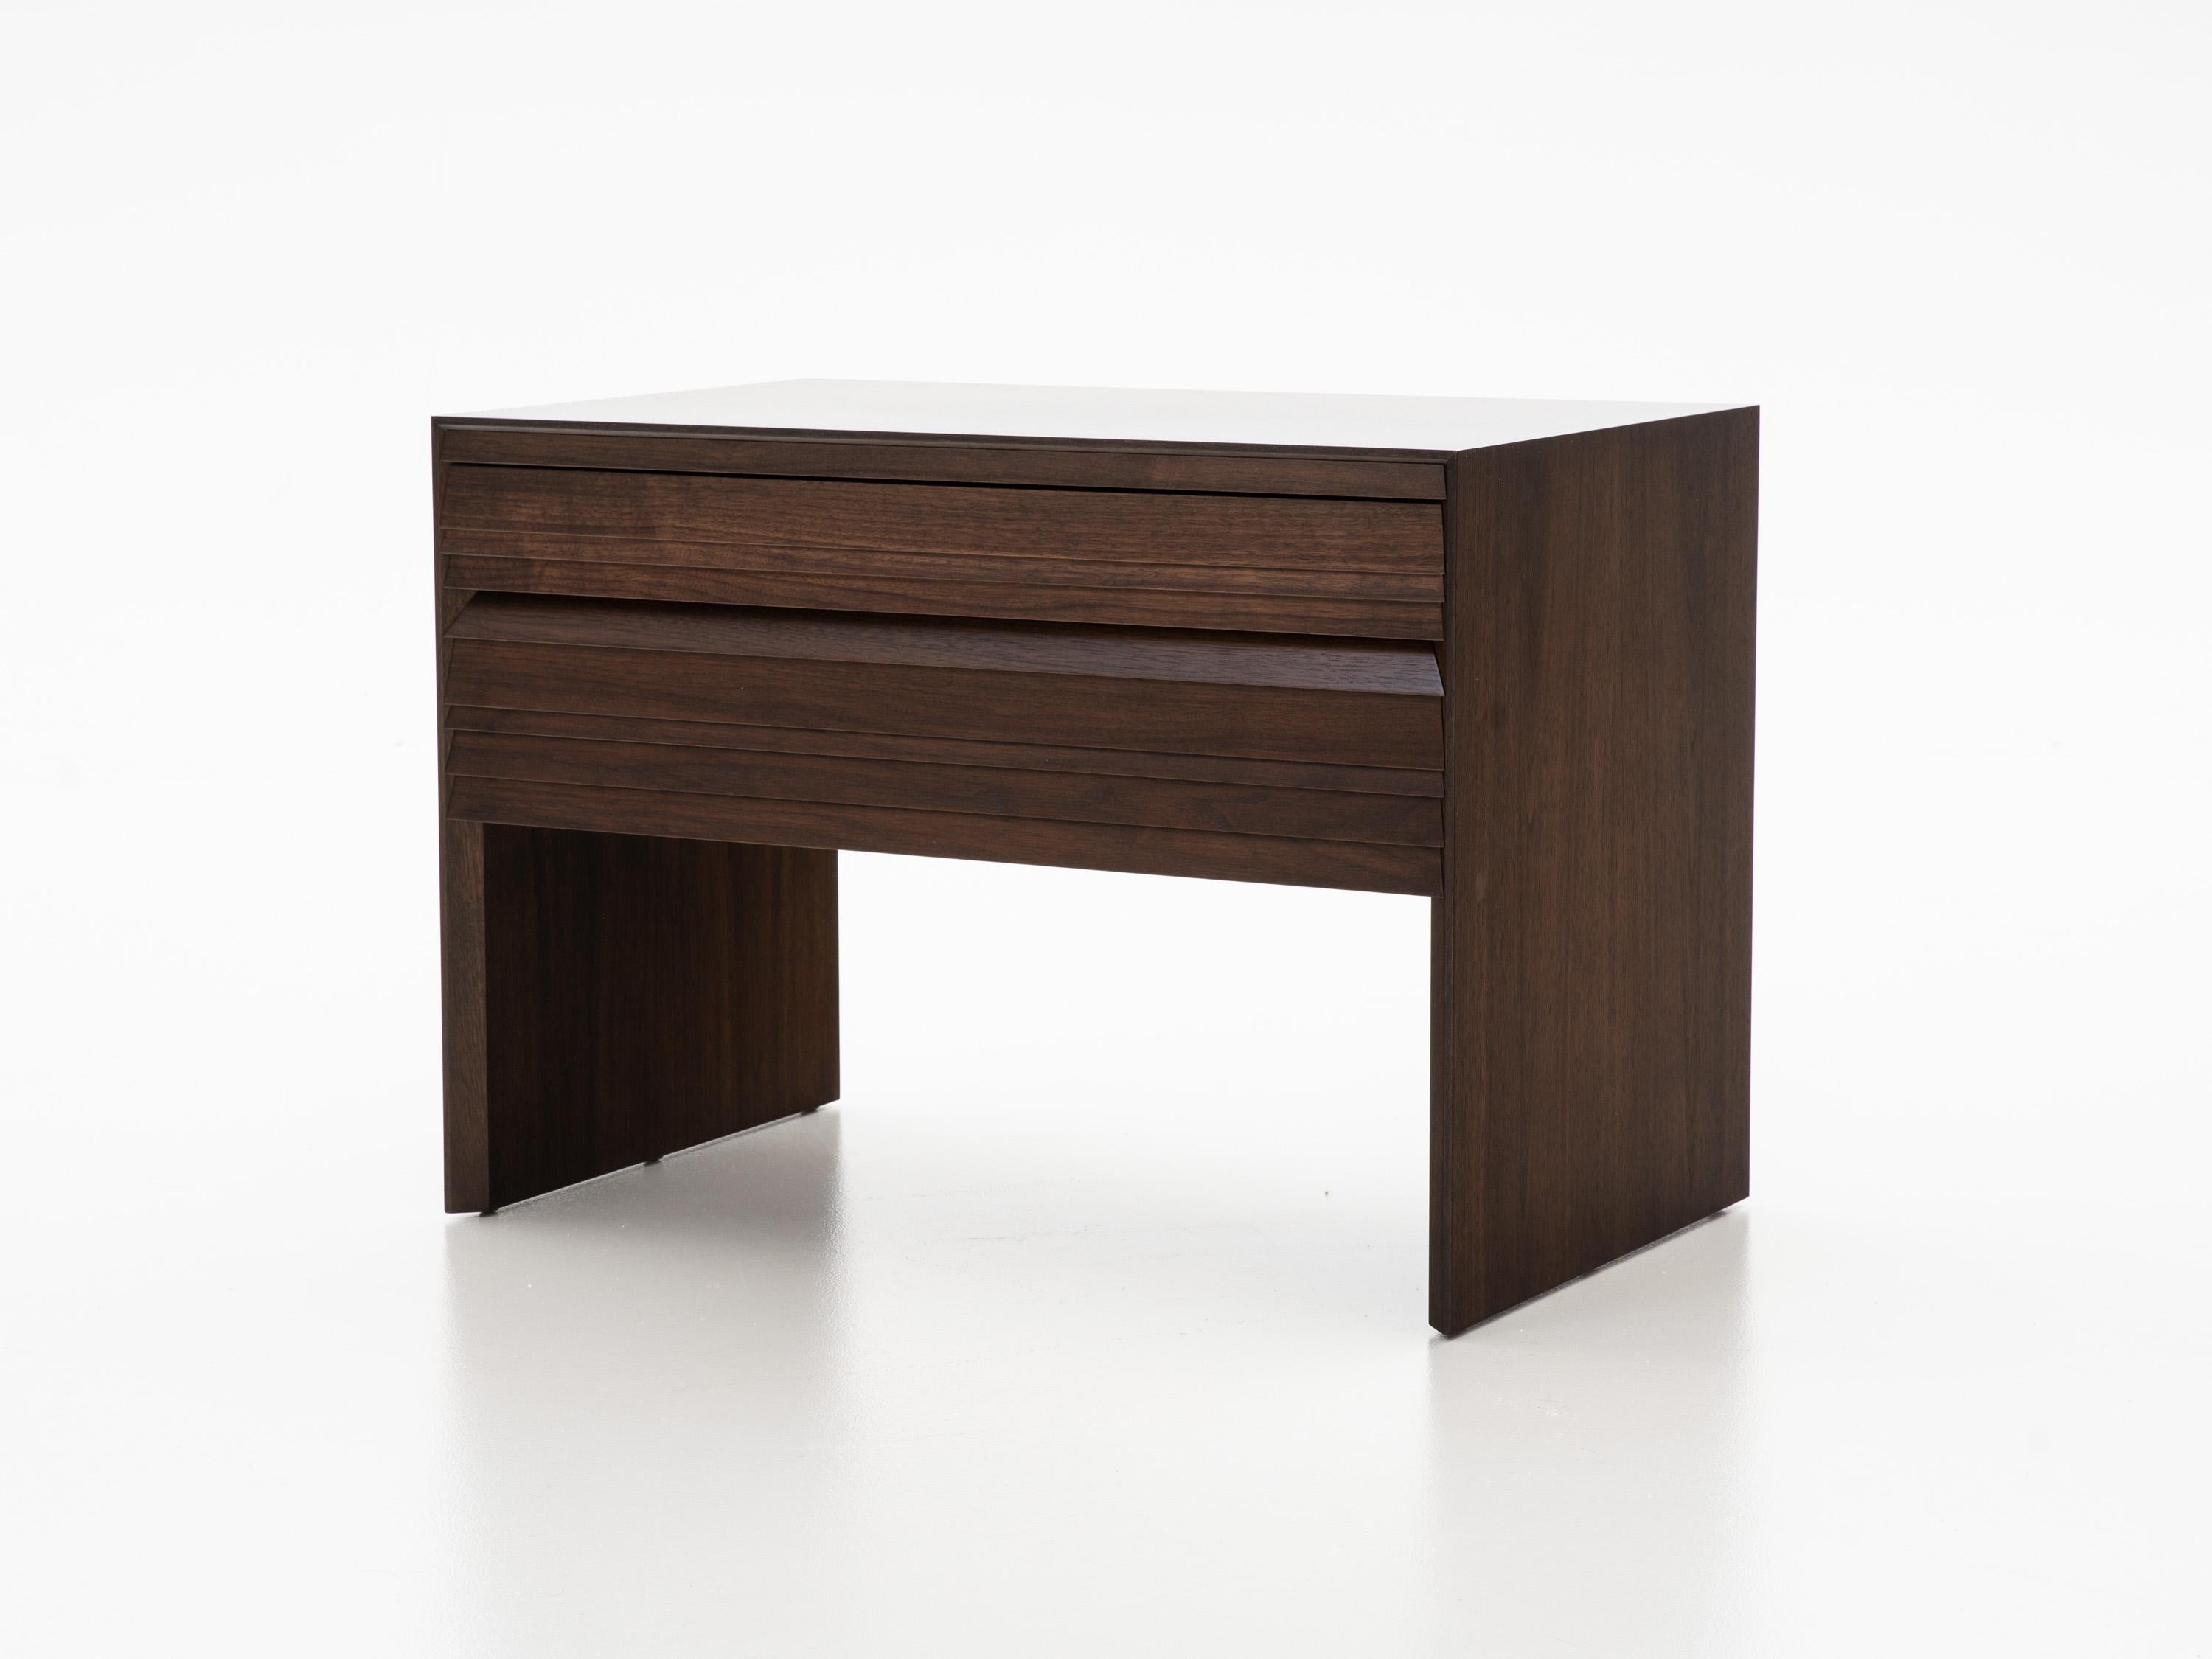 HOLLY HUNT Louvered bedside table in dark walnut finish. A highly functional solution for bedside that is perfectly proportioned with space for your favorite book and more.

Additional Information:
Finish: Walnut Dark Cocoa: 07-150
Condition: New